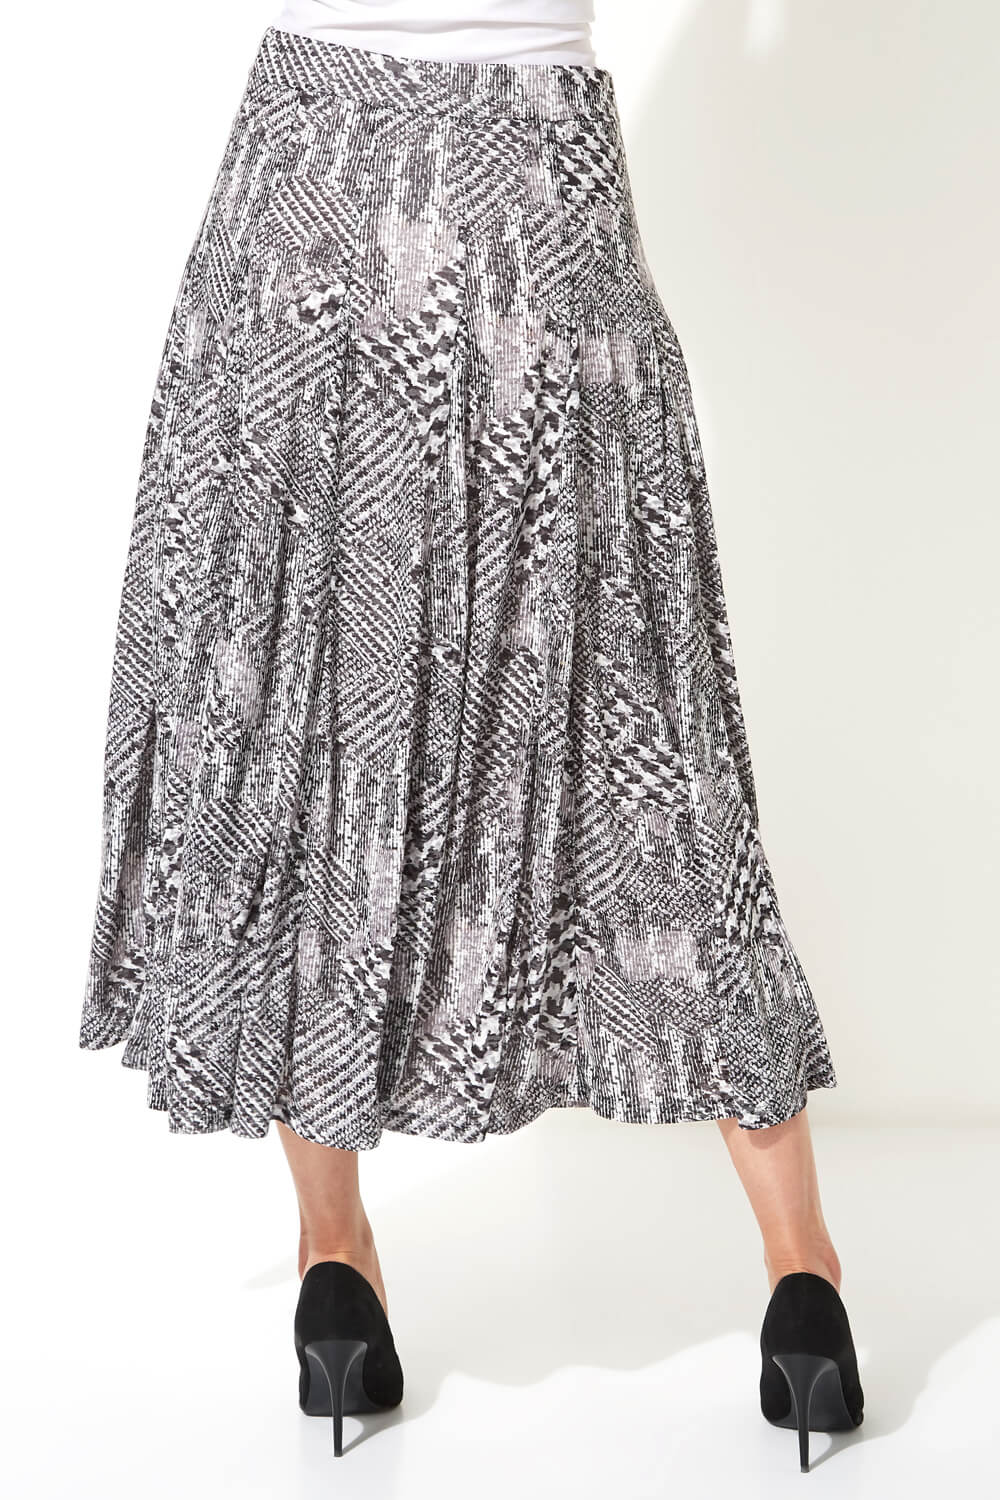 Black Abstract Dogtooth Burnout Skirt, Image 2 of 5